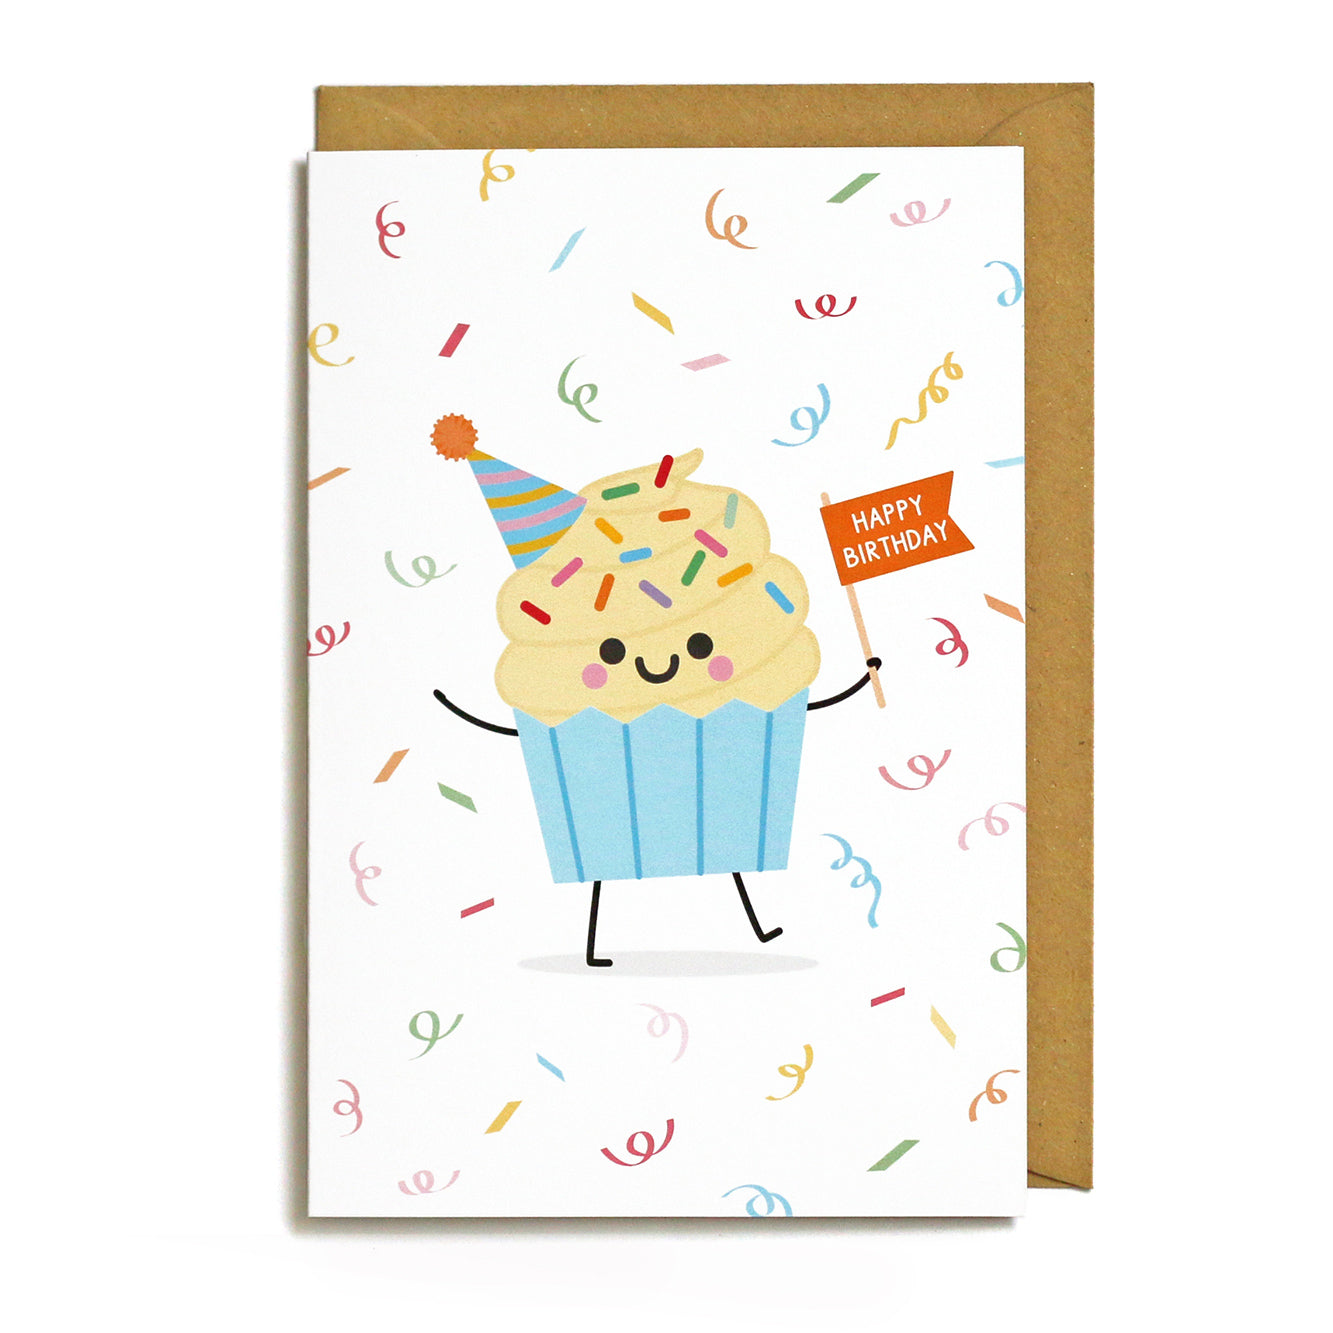 greeting card featuring a happy vanilla cupcake holding an orange flag with 'HAPPY BIRTHDAY' on it, surrounded by illustrated confetti